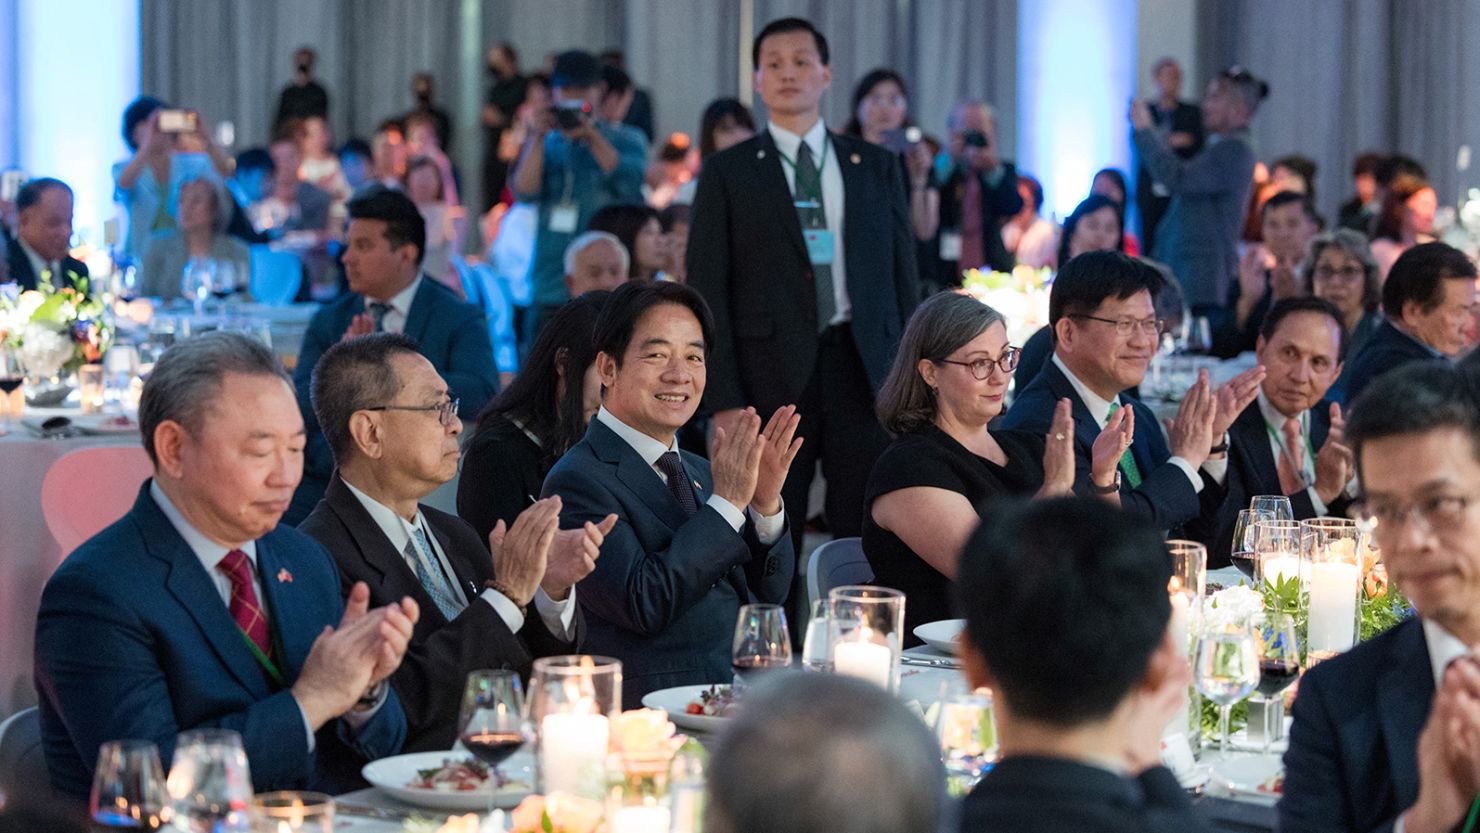 Taiwan's Vice President William Lai (center) attends a lunch banquet in New York on August 13.